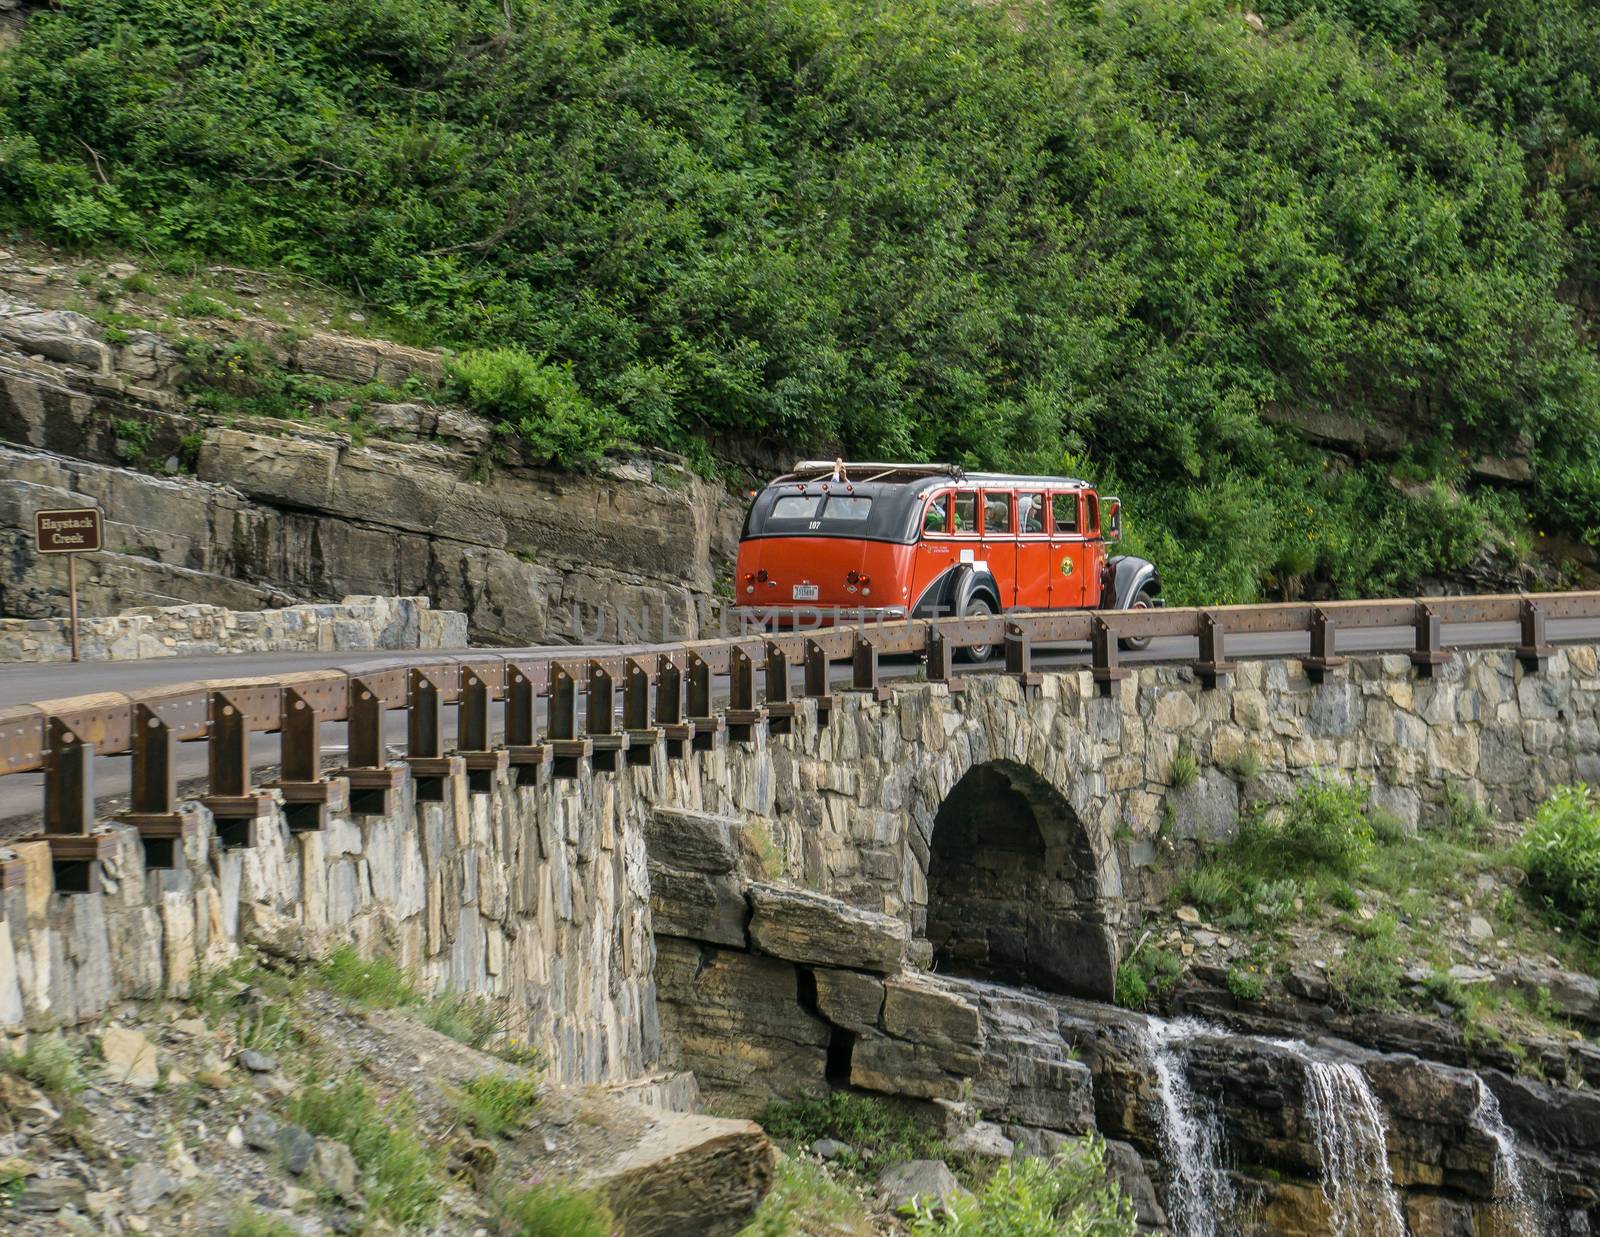 Glacier National Park, Montana, USA-July 11, 2015: The famous Red Bus vehicle of the parks service takes  passengers up to  tour Going to the Sun Road inside the park.